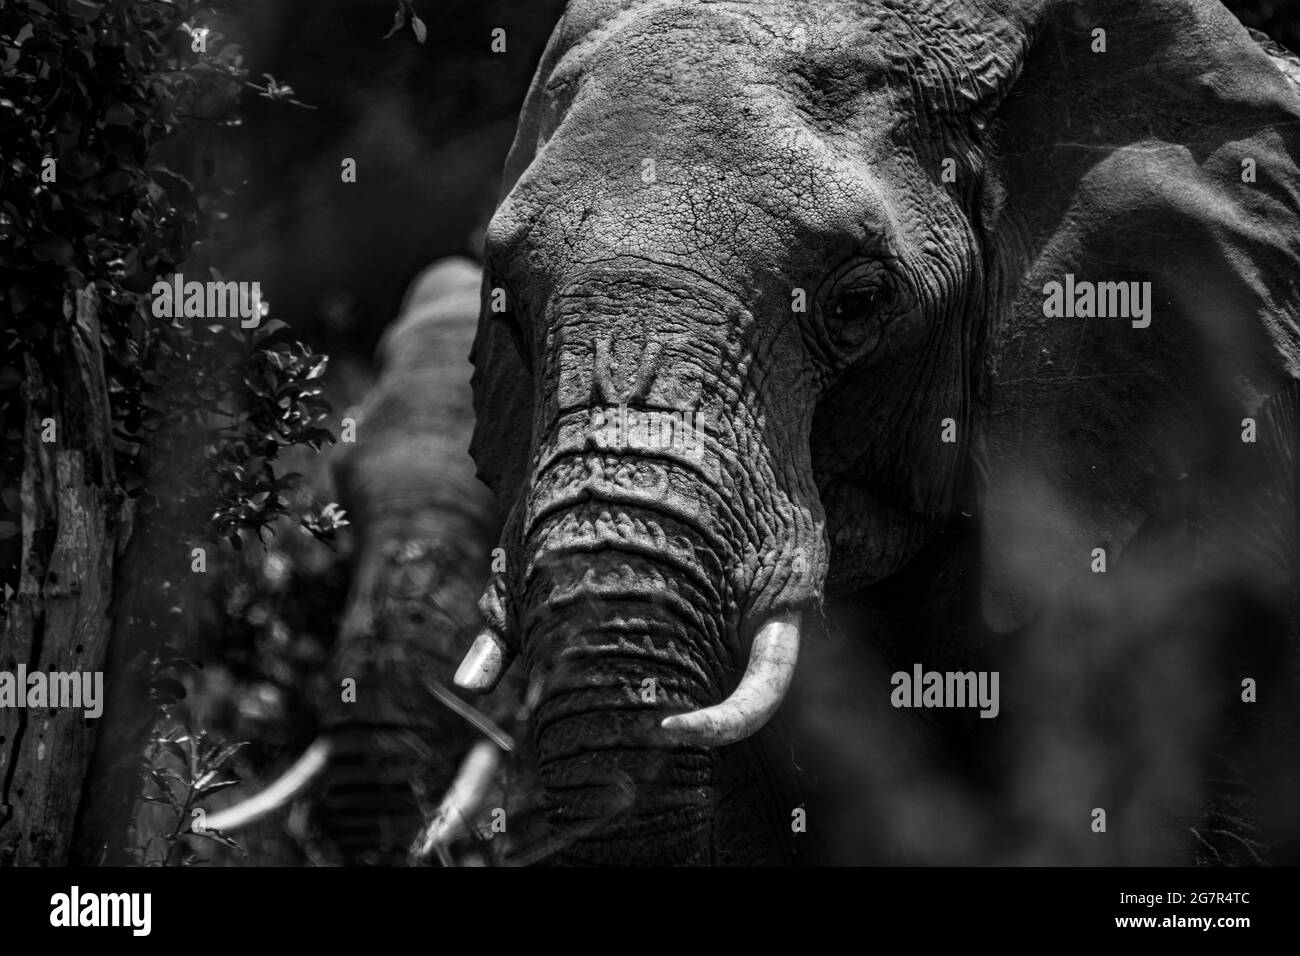 A matriarch of a group of elephants photographed from the front in black and white, seen while on a safari in Lolldaiga Ranch in Kenya Stock Photo